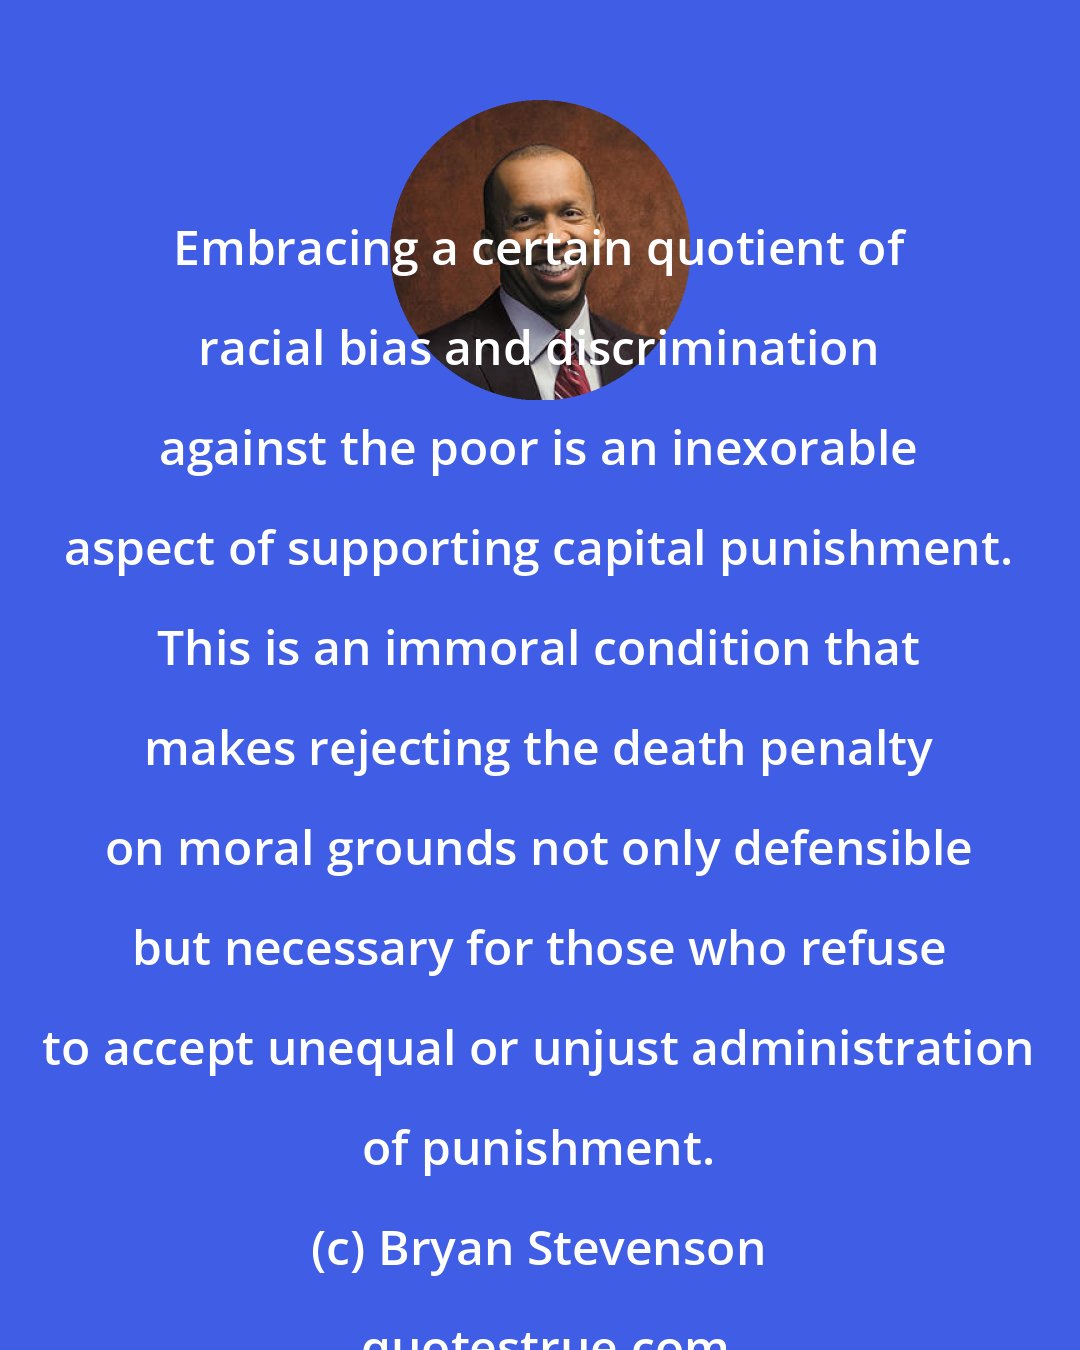 Bryan Stevenson: Embracing a certain quotient of racial bias and discrimination against the poor is an inexorable aspect of supporting capital punishment. This is an immoral condition that makes rejecting the death penalty on moral grounds not only defensible but necessary for those who refuse to accept unequal or unjust administration of punishment.